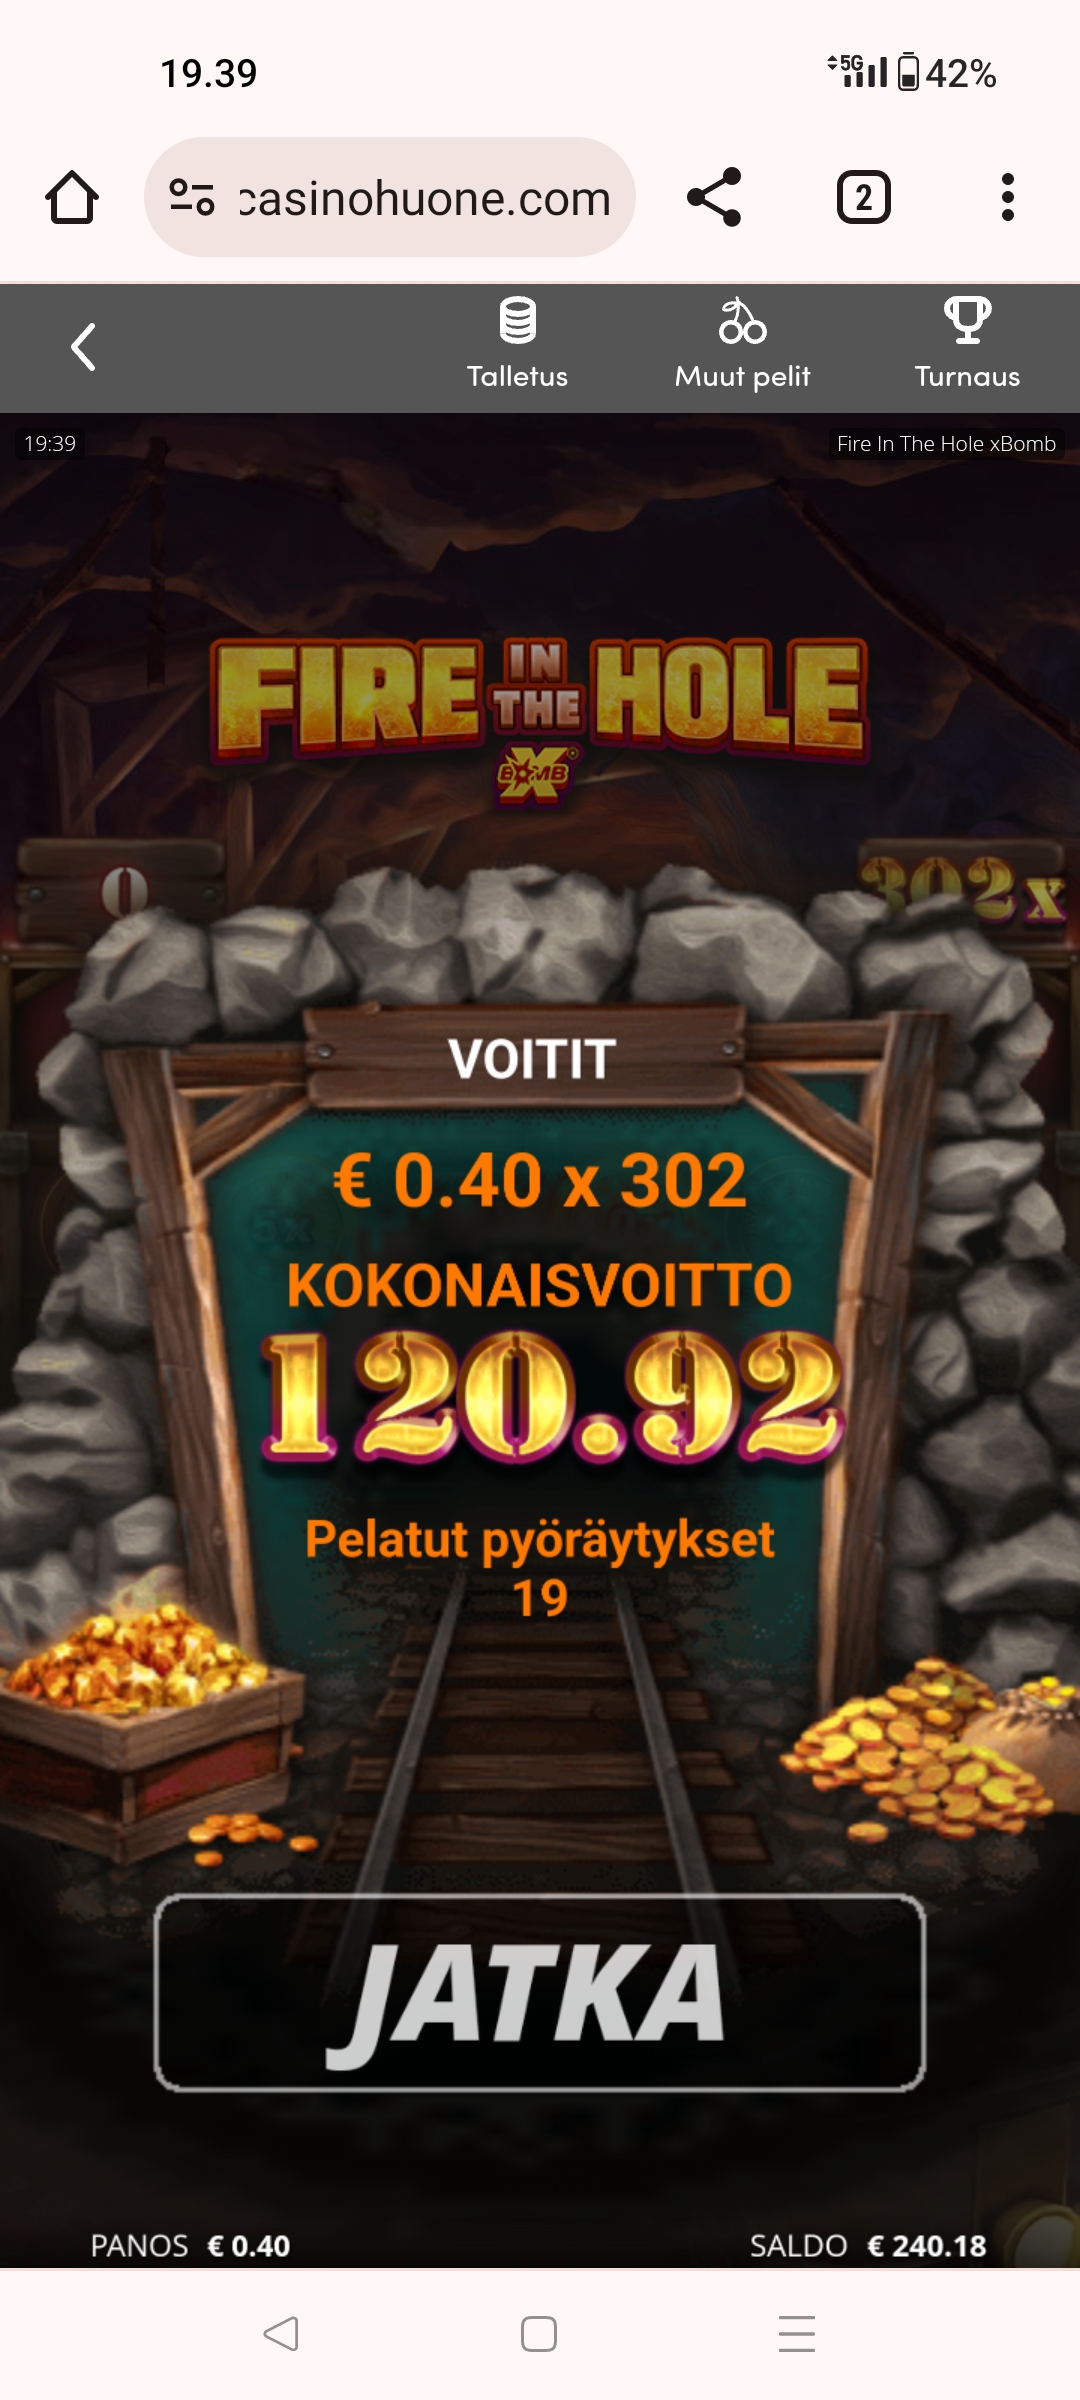 Fire in the hole – Unibet (120.92 eur / 0.40 bet) | Kapteni85